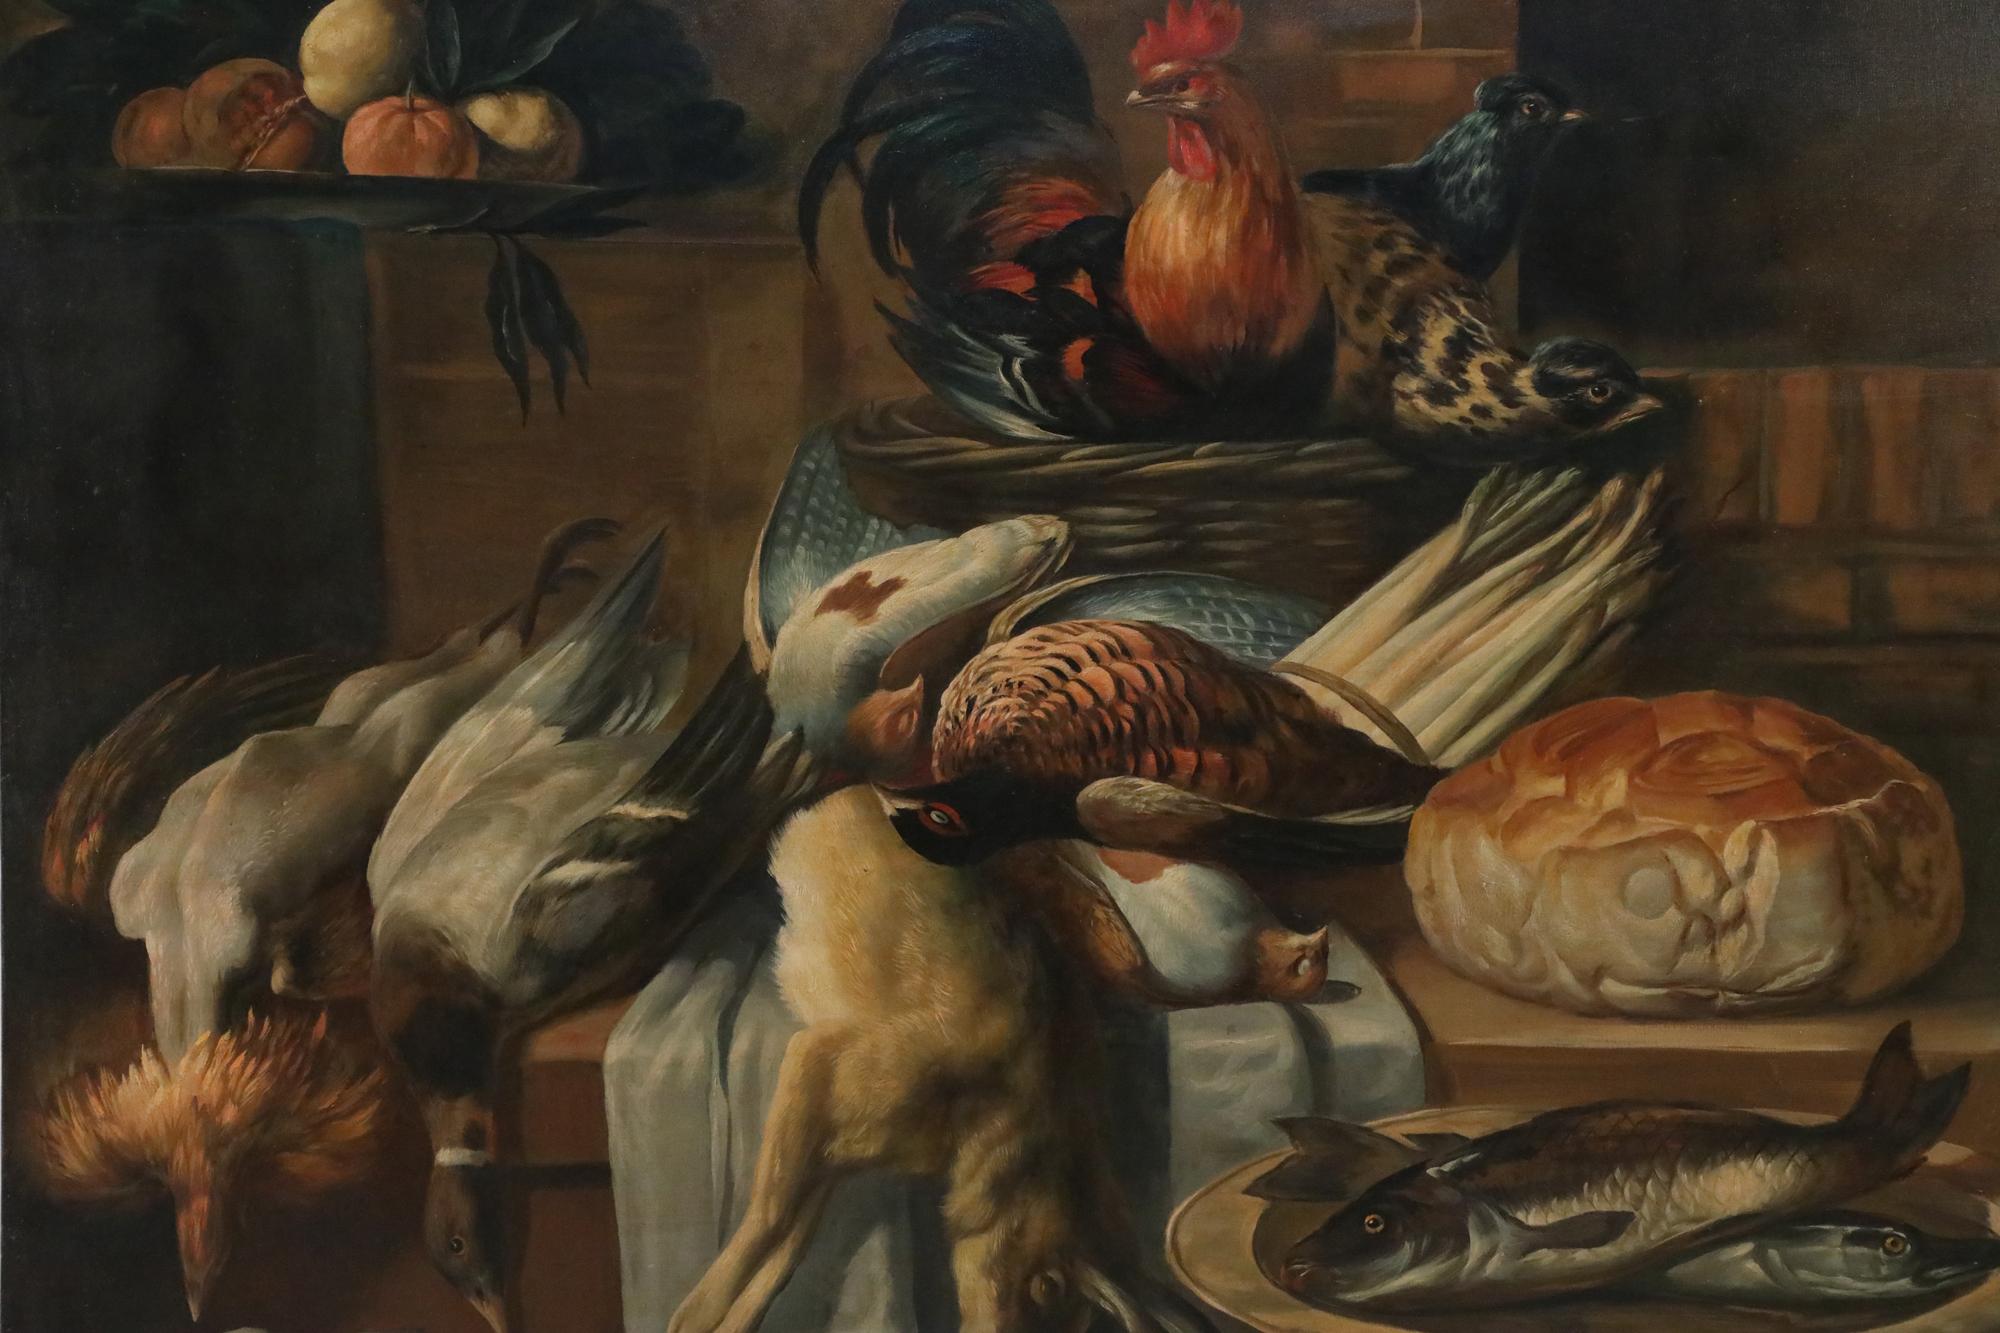 Vintage (20th Century) richly-captured still life of game birds, rabbit and fowl laid out on a butcher block alongside a rounded loaf of bread, fish in a bowl in the foreground across from a sniffing dog, and fowl in a propped-up basket overlooking